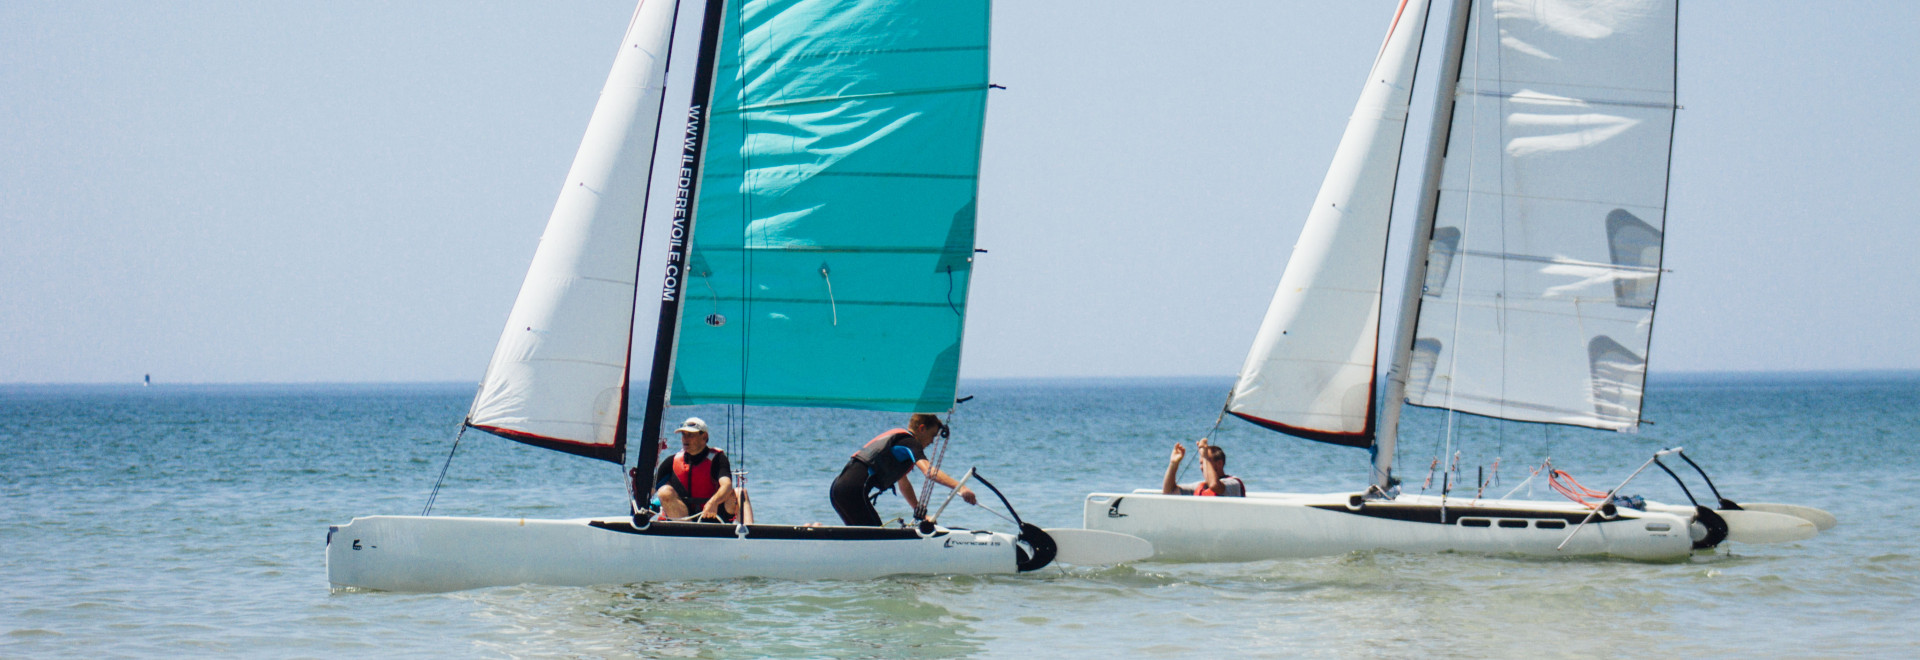 Catamaran on the Ile de Ré: challenge the wind and the waves. Learn or improve your catamaran skills with La Cabane Verte.